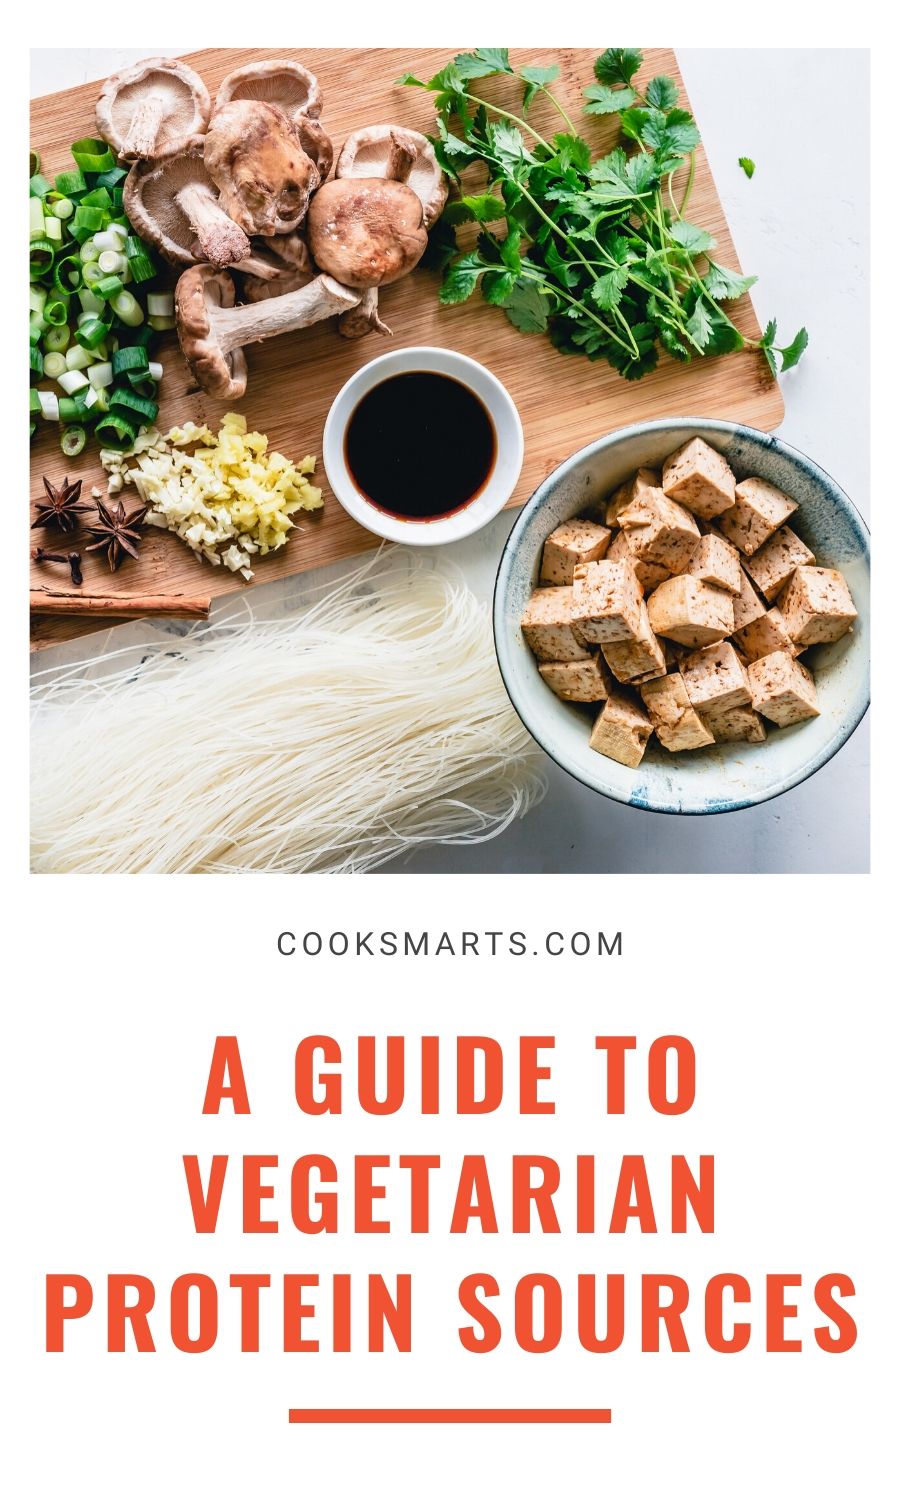 A Guide to Vegetarian Protein Sources | Cook Smarts